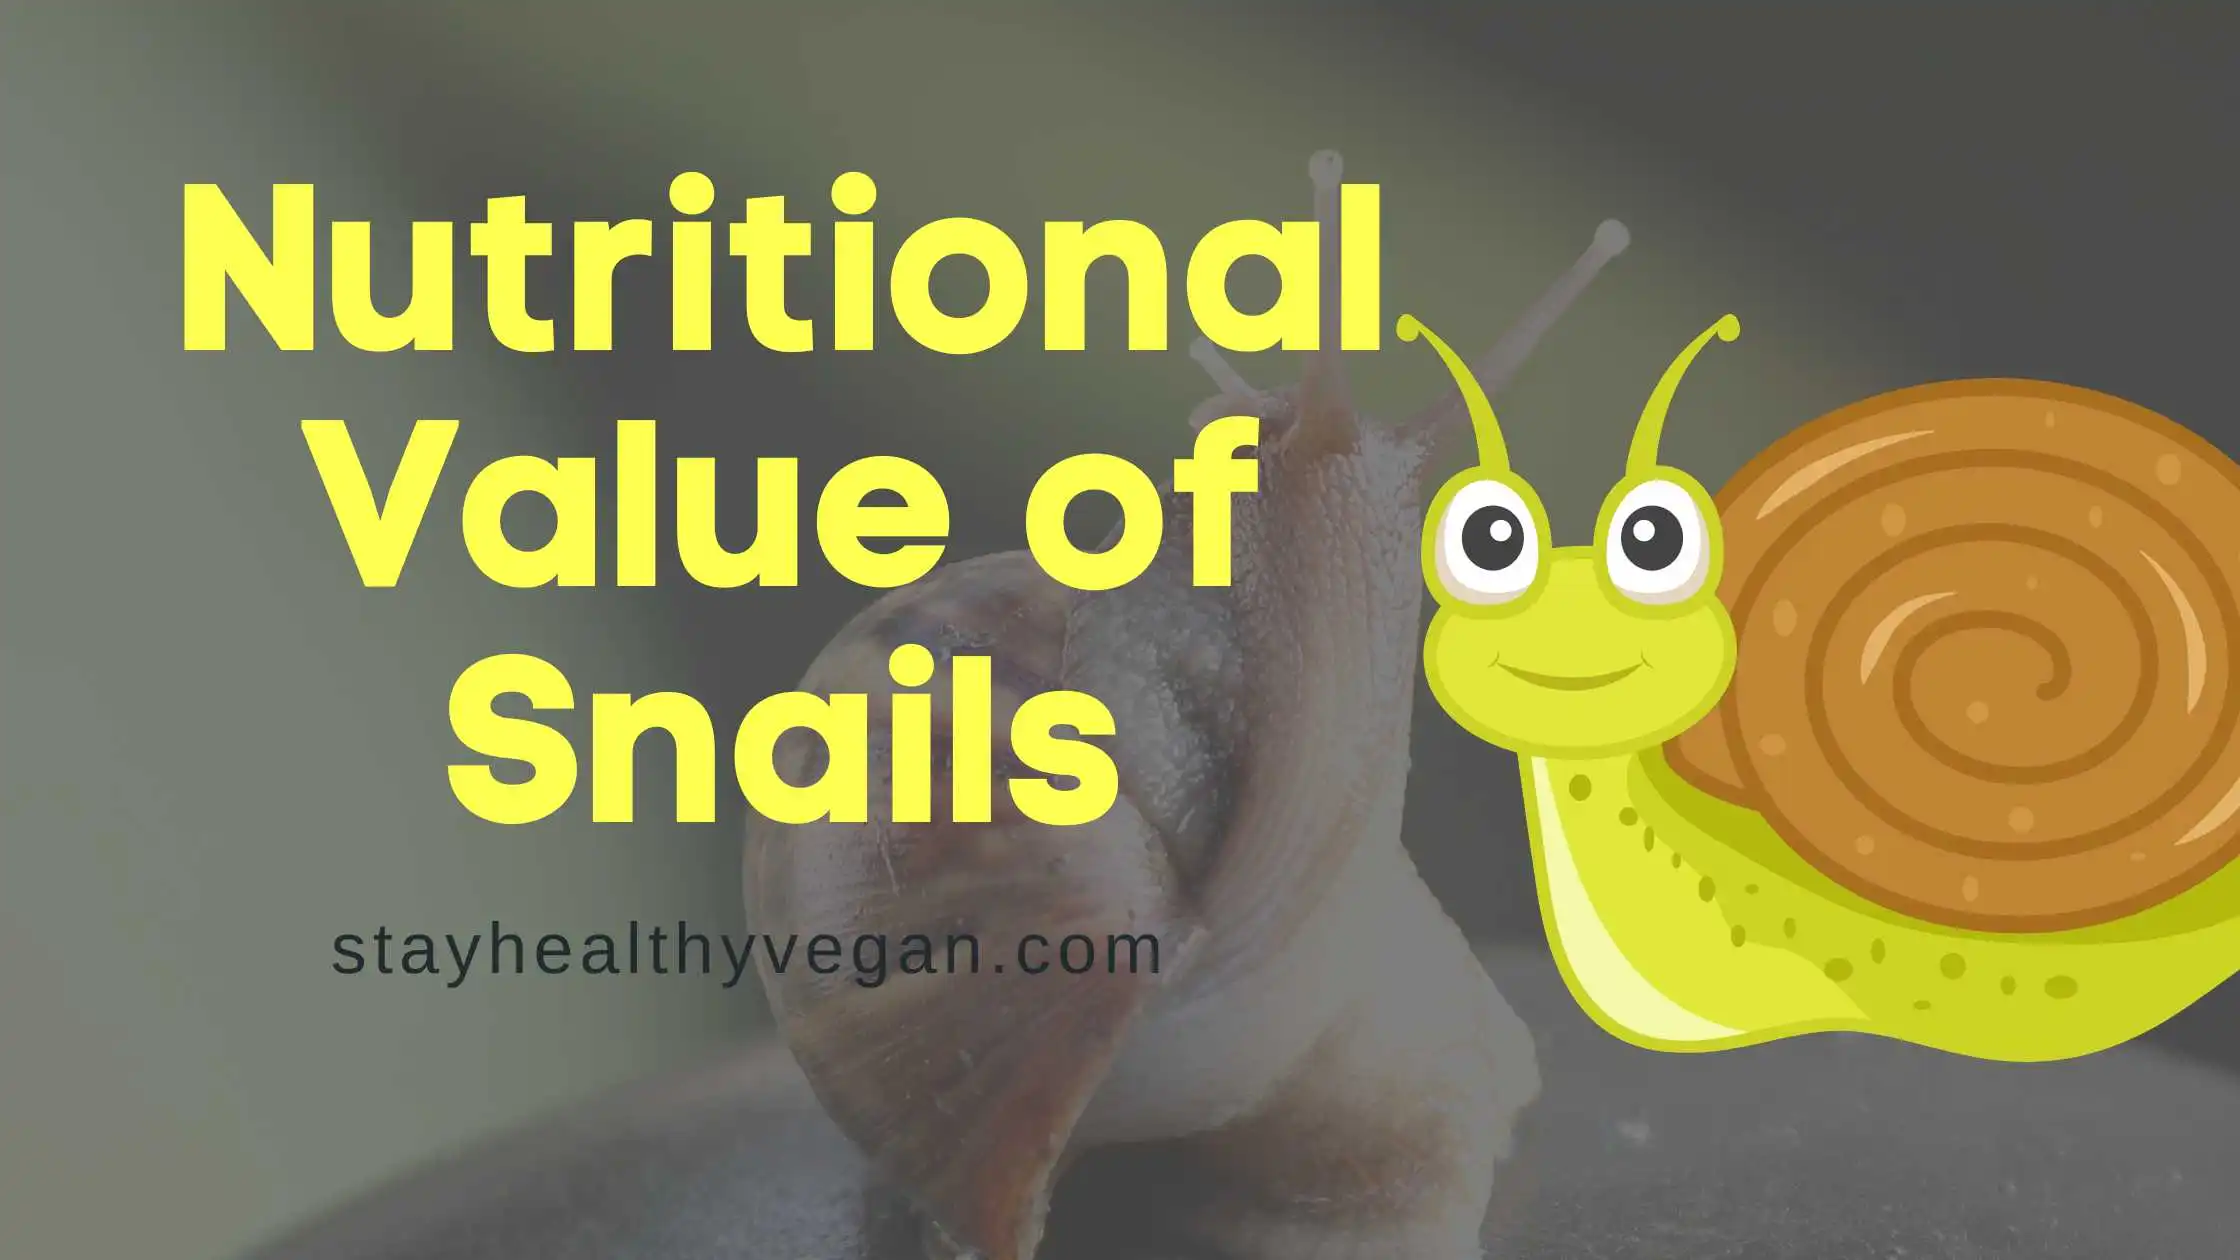 Nutritional Value of Snails